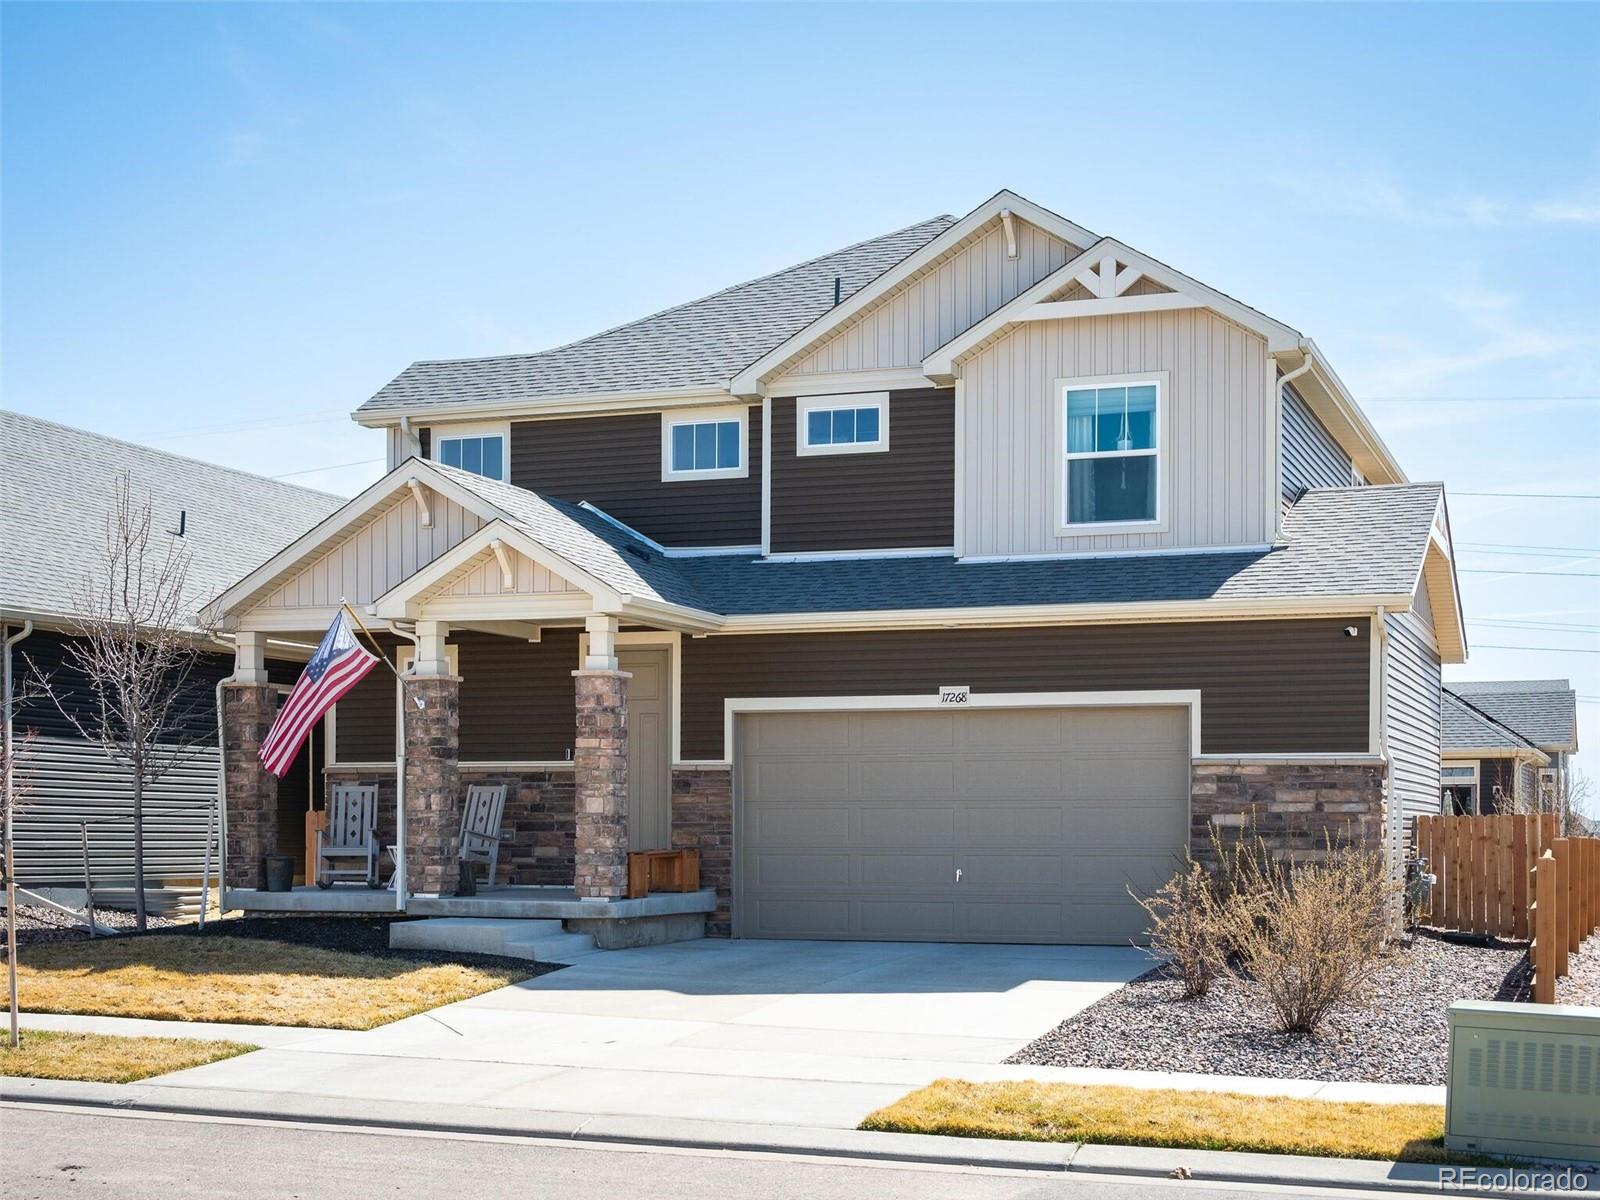 17268 E 103rd Place, commerce city MLS: 5235332 Beds: 4 Baths: 3 Price: $560,000